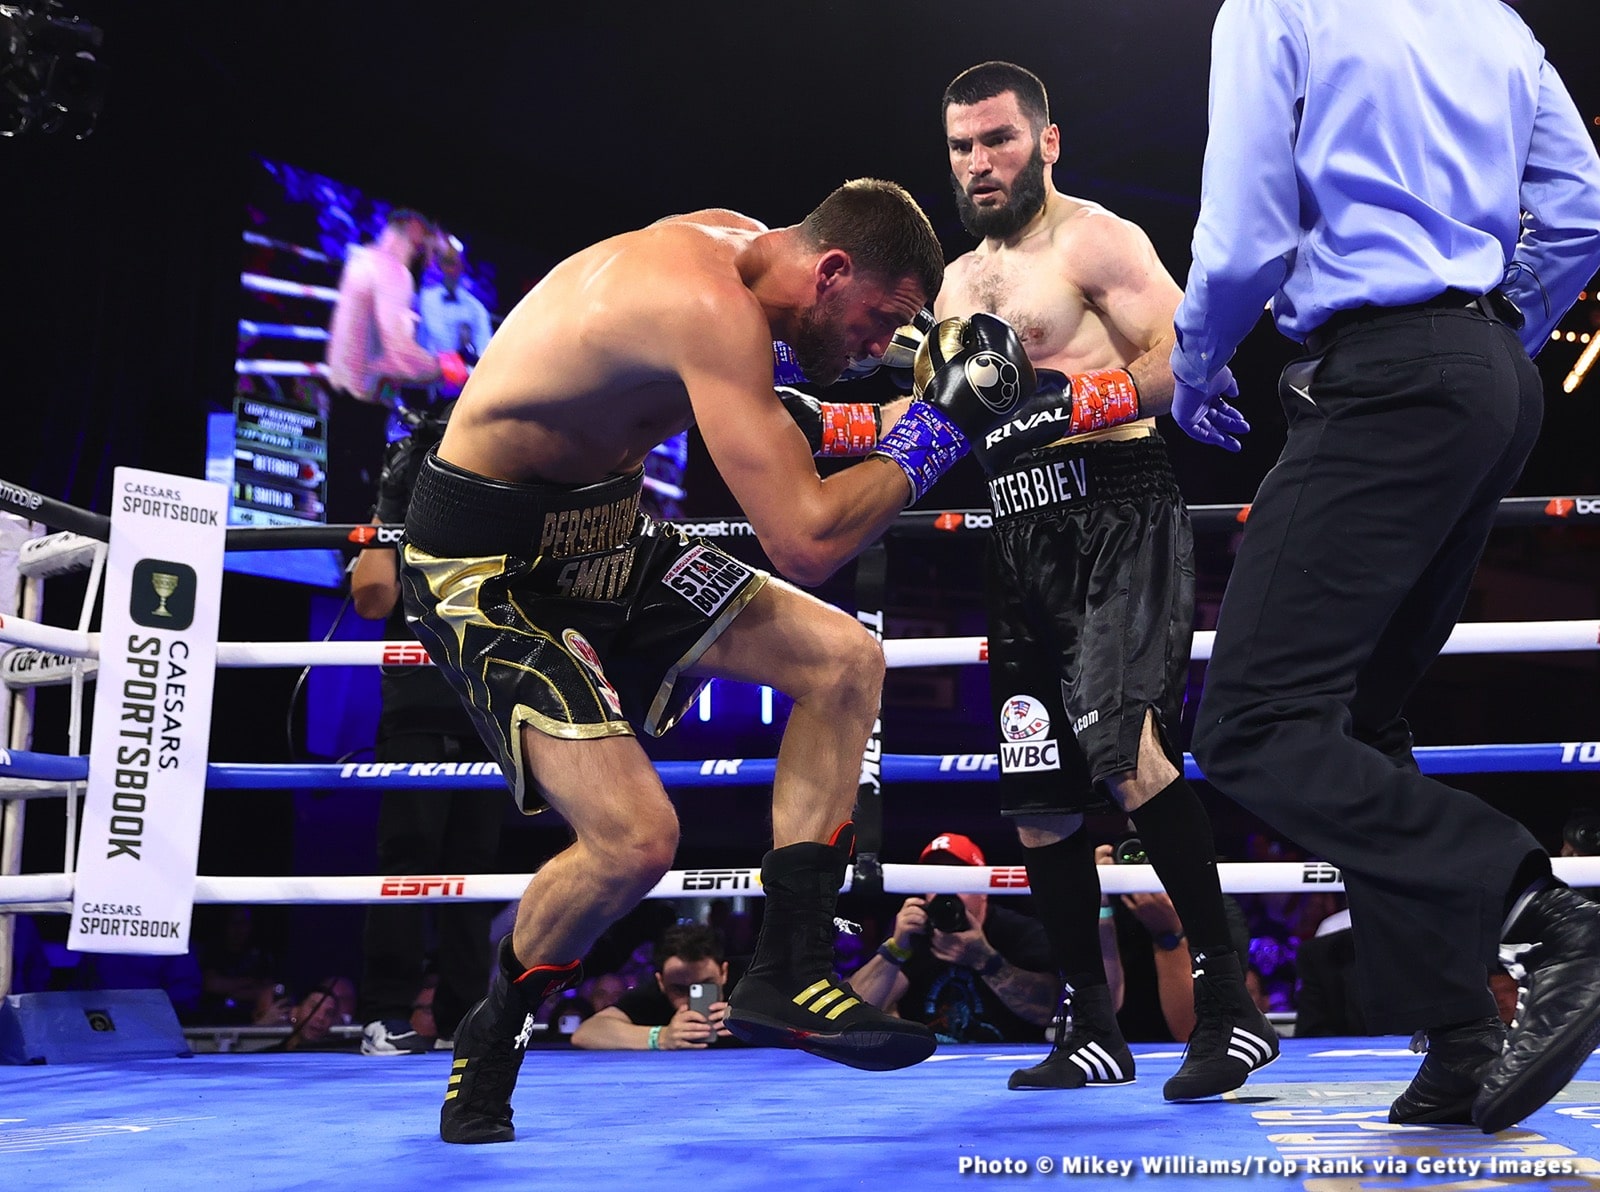 Artur Beterbiev stops Joe Smith Jr by 2nd round knockout - Boxing Results